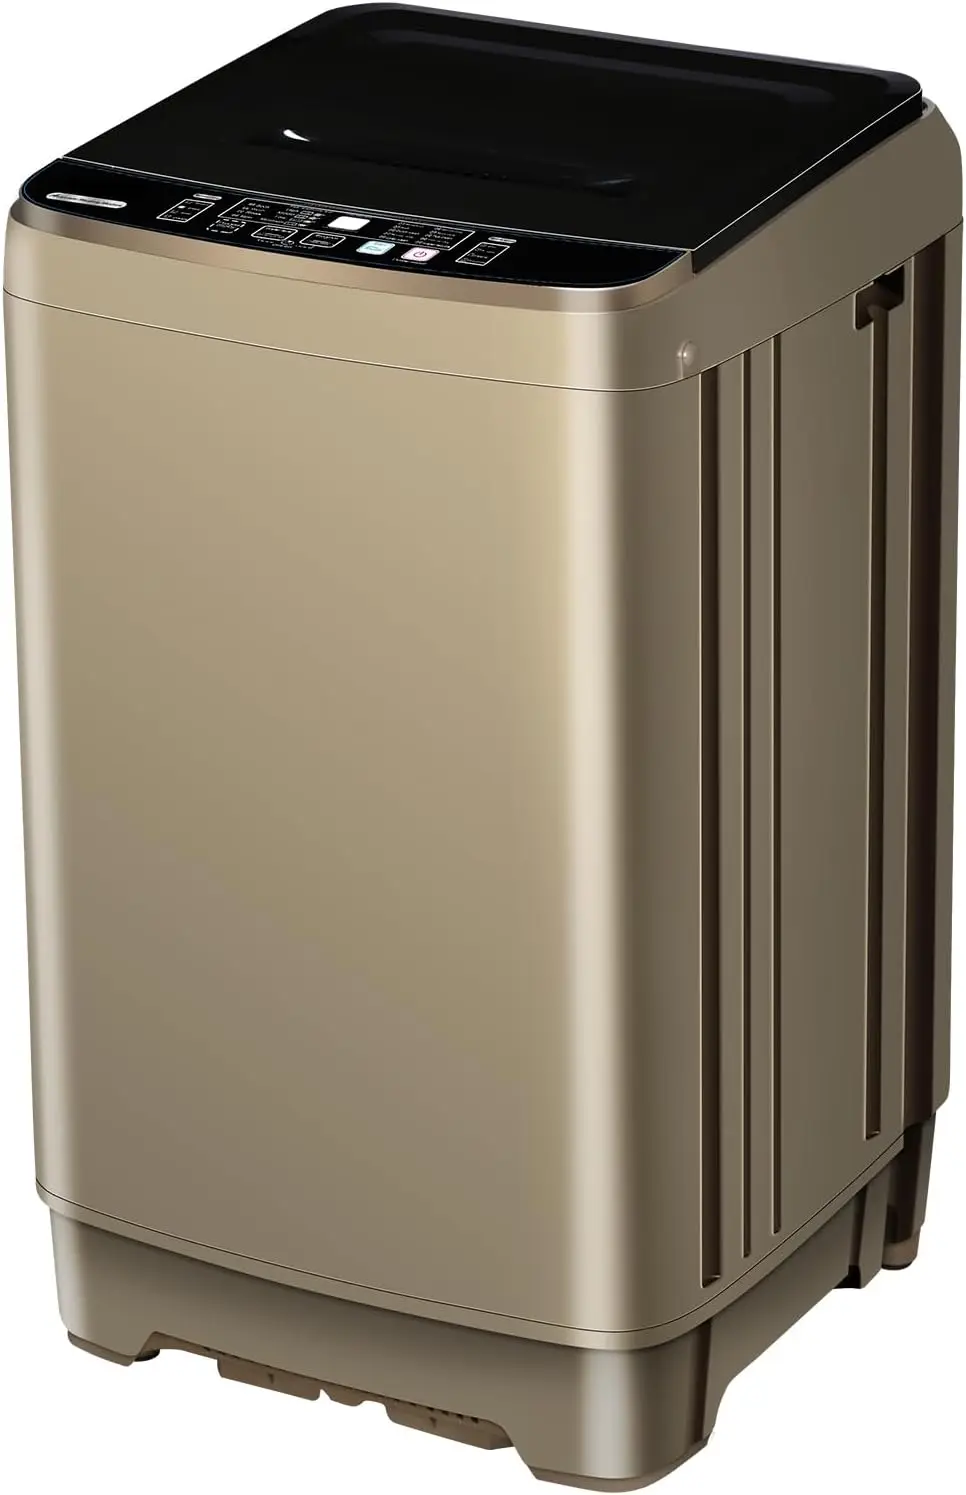 Full-Automatic Washing Machine 15.6lbs , Portable Compact Laundry Washer... - $280.62